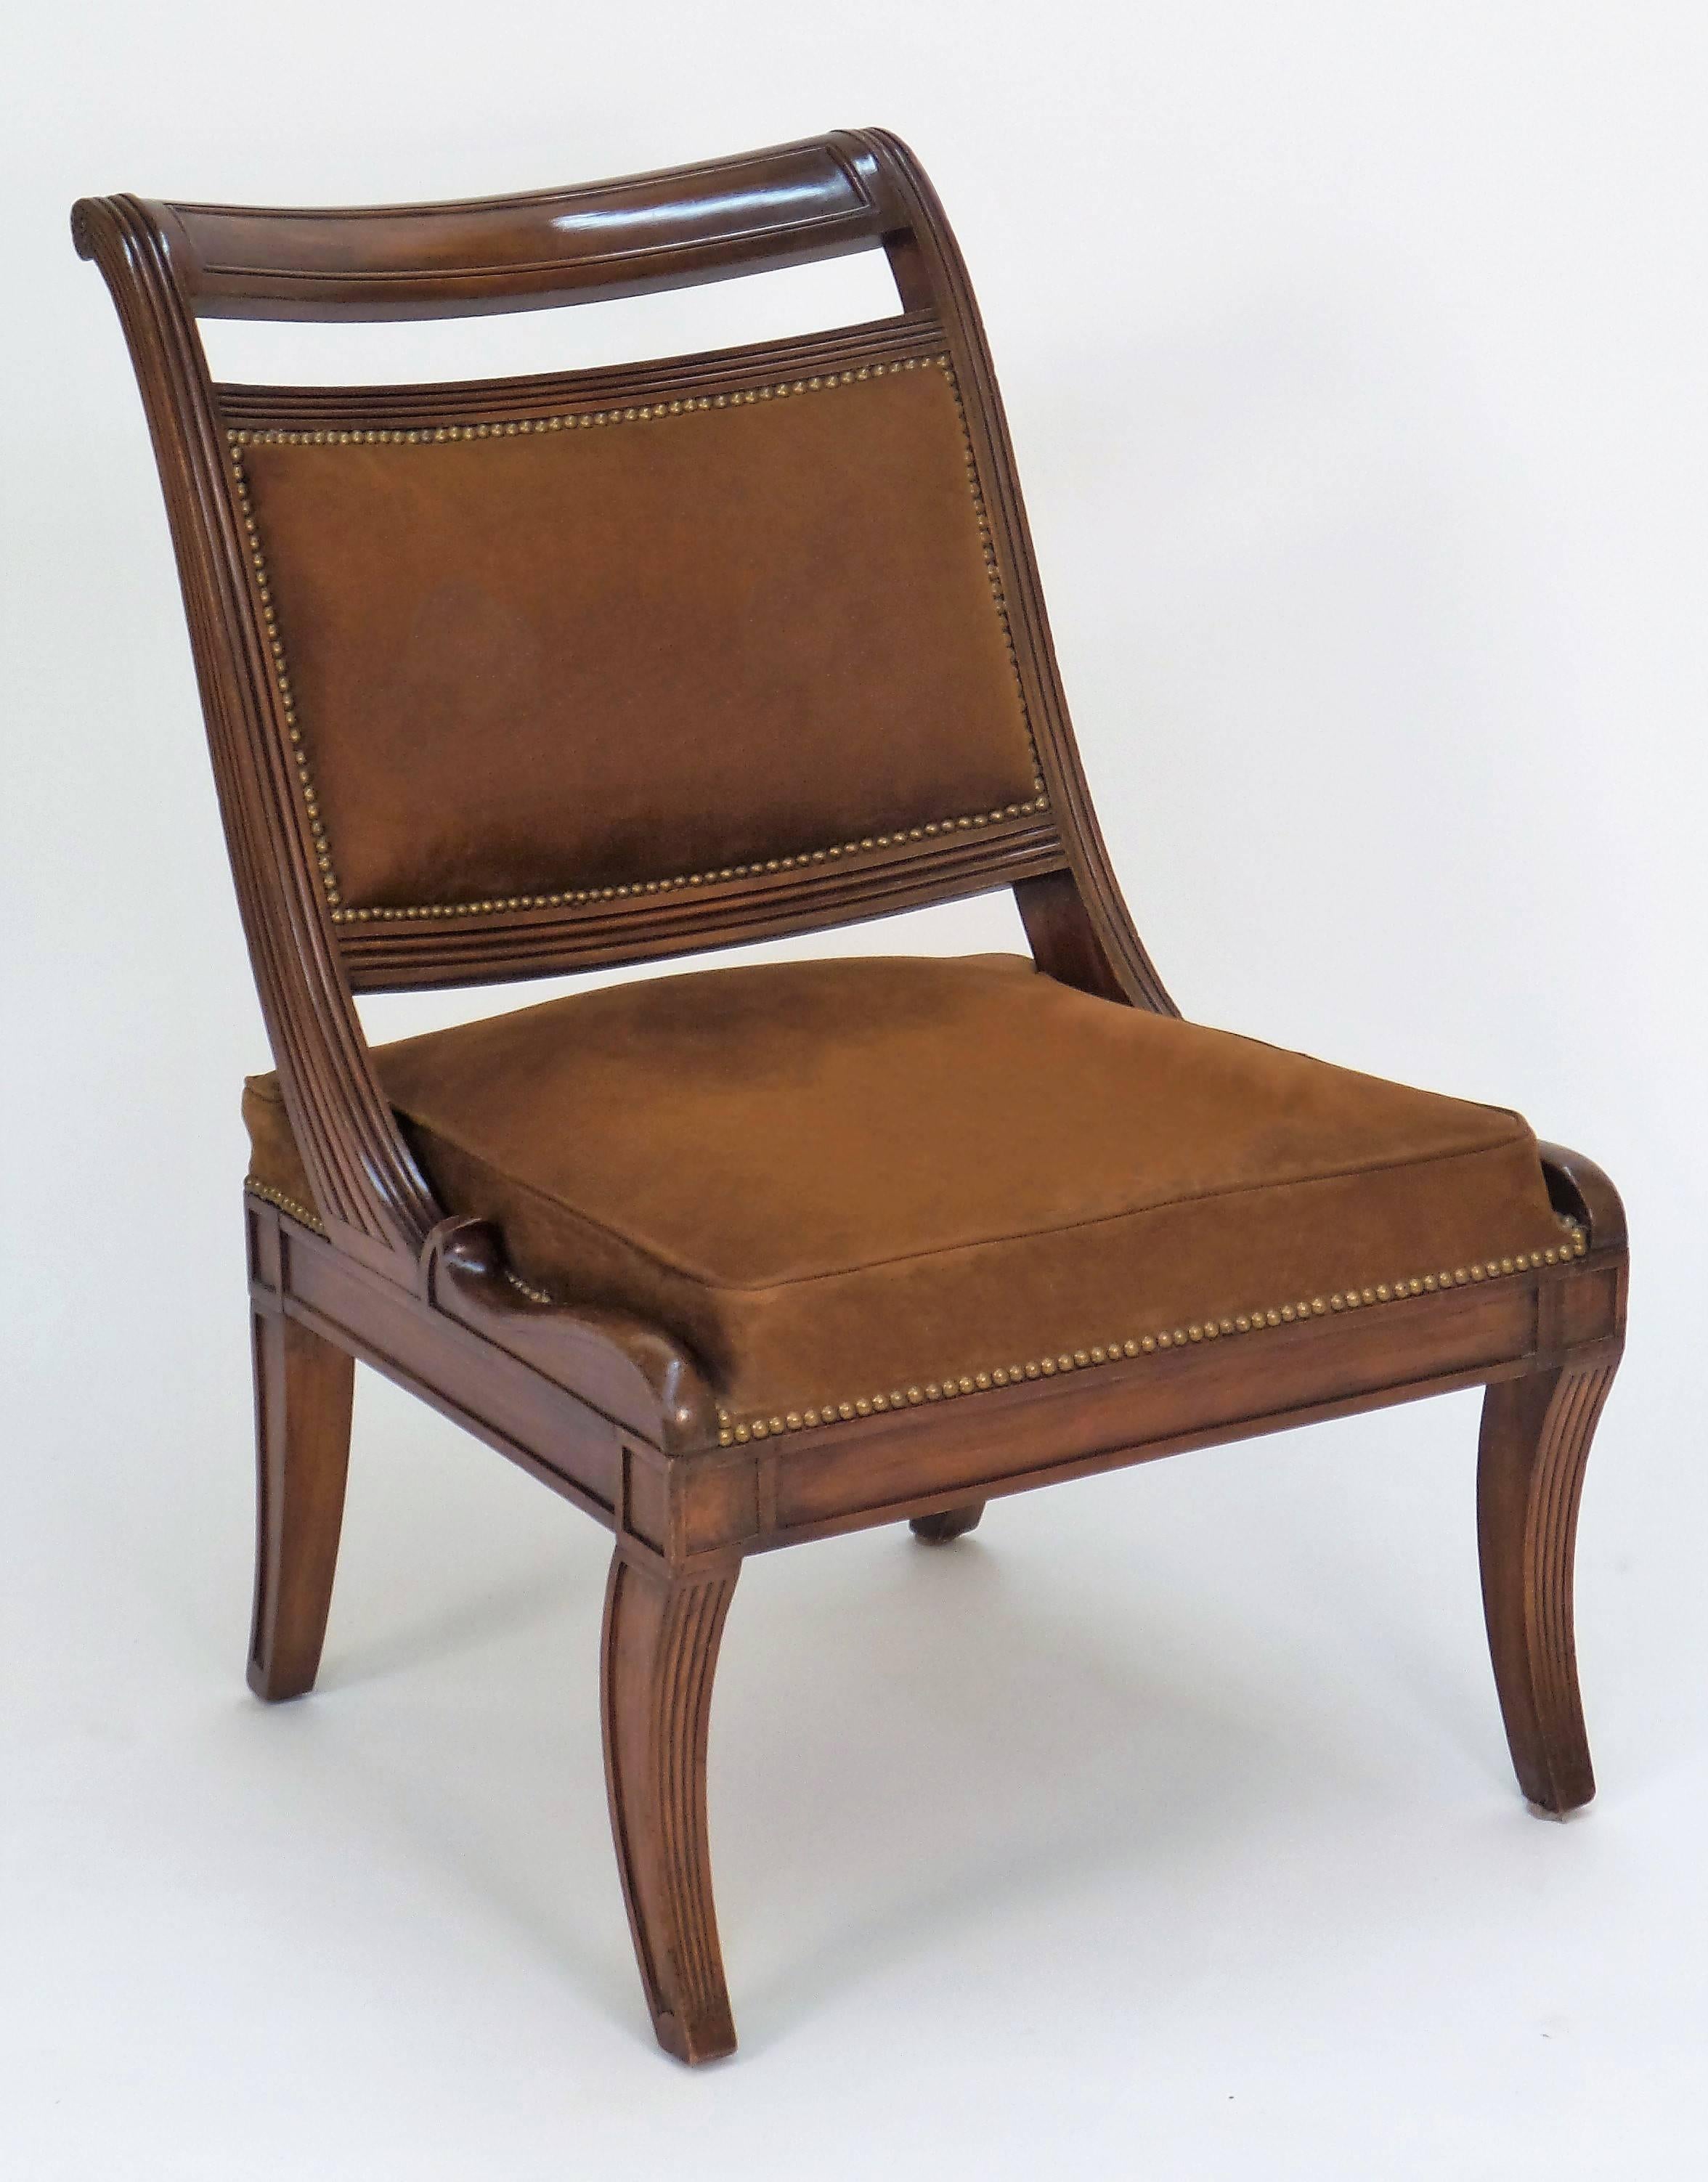 A Regency style chair inspired by Thomas Hope and Klismos style chairs, with a sweeping back and reeded frame details on sabre form feet and a boxed seat cushion. COM and custom finishes available.